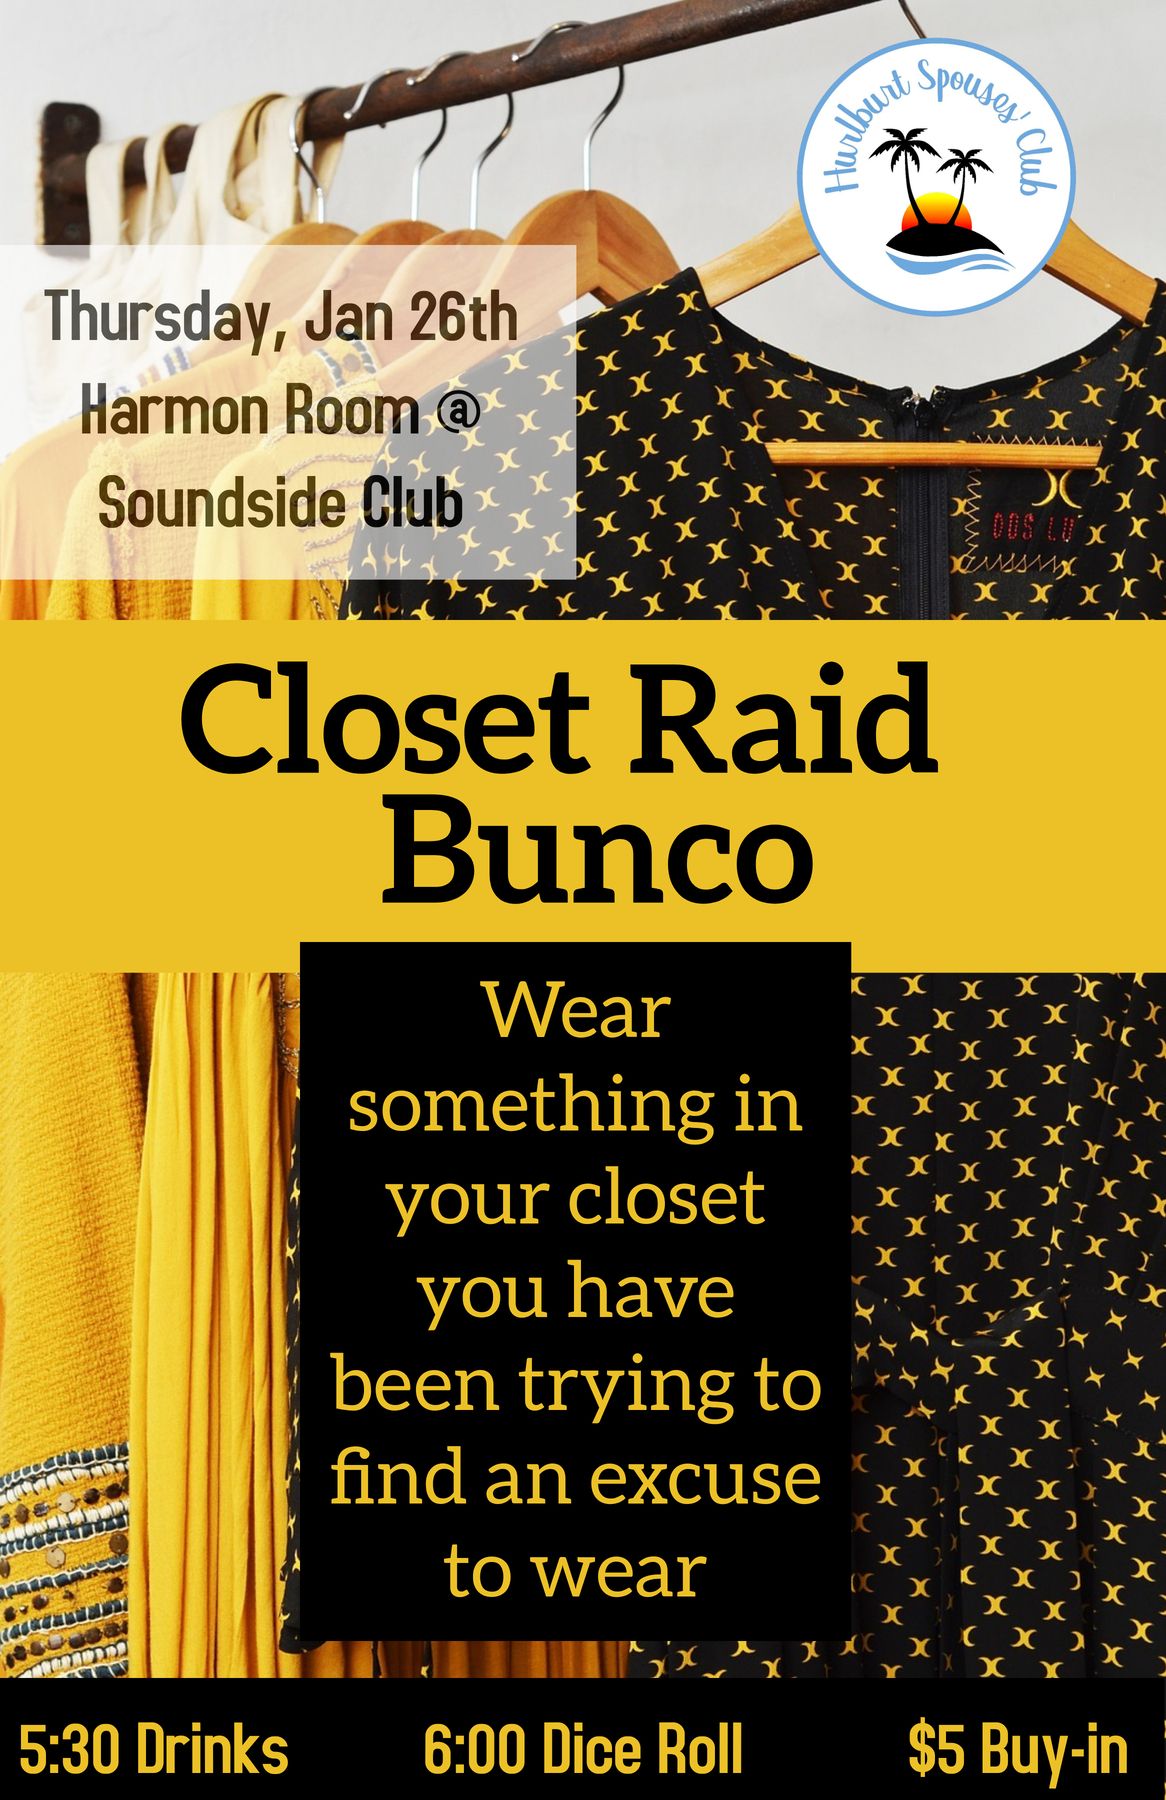 Find that perfect item from your closet that you have been waiting to wear and meet us for bunco!